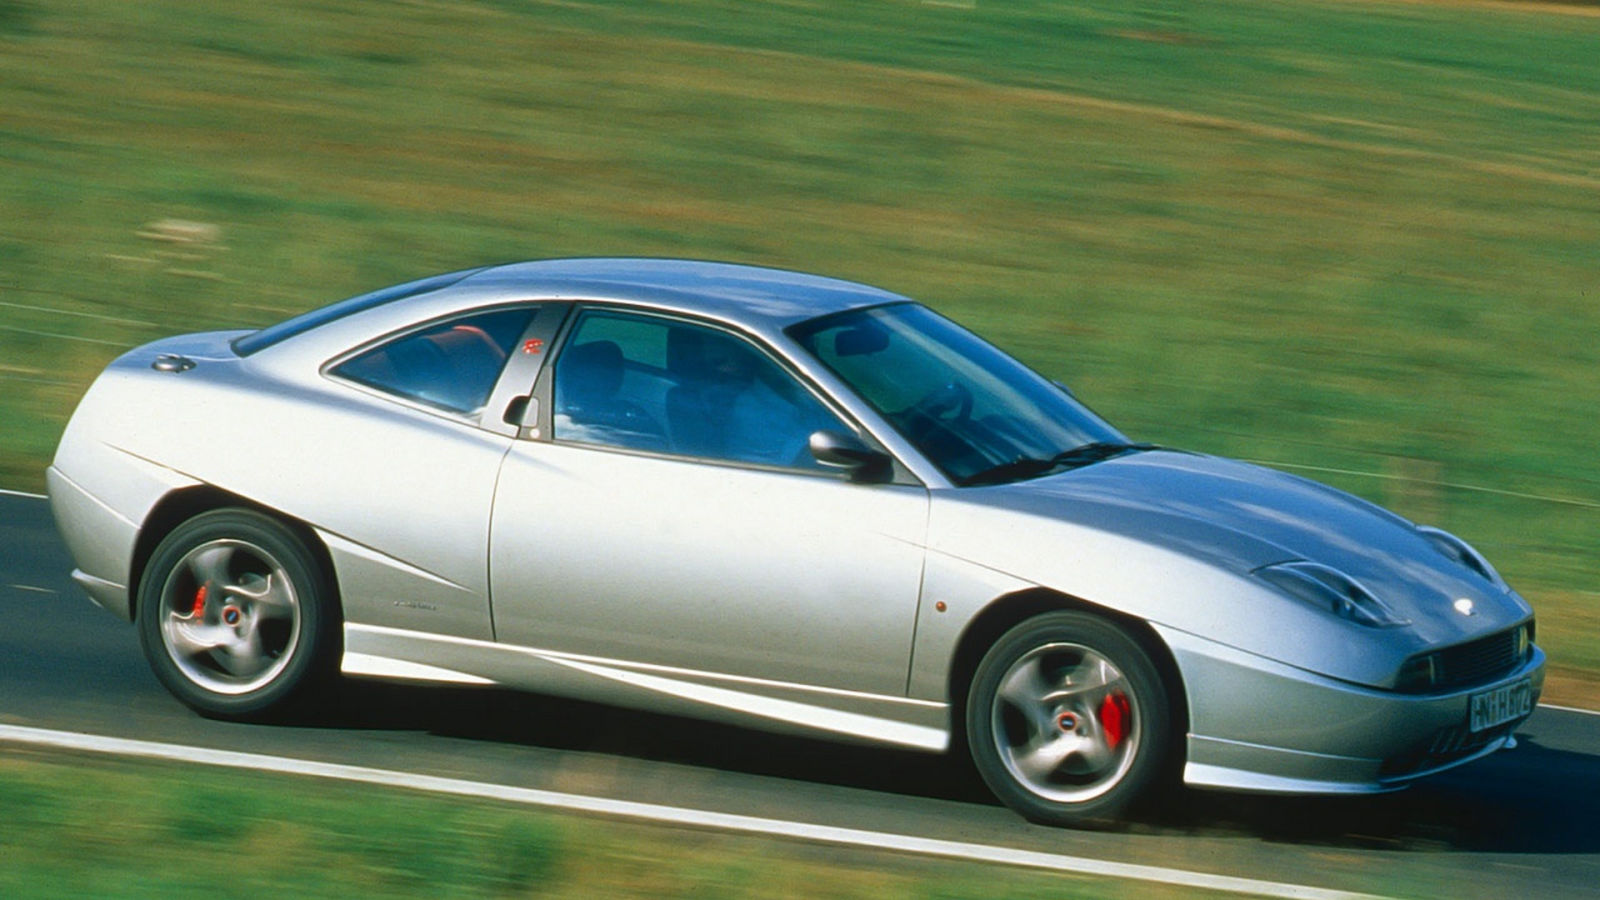 Illustration for article titled Heres to the forgotten Fiat Coupe 20V Turbo